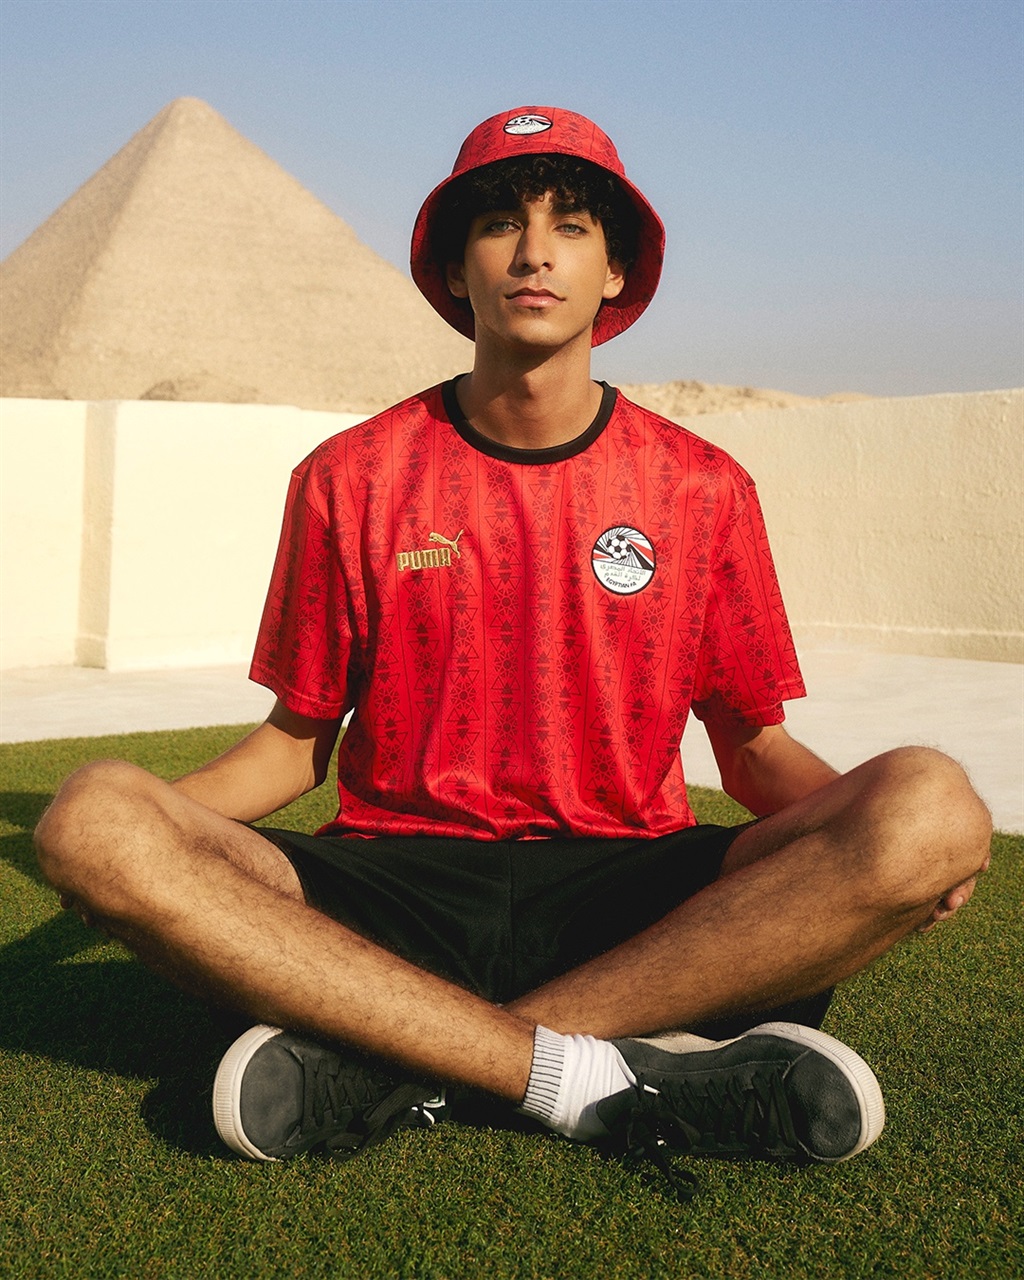 PUMA has launched the ftblCulture Fanwear Collecti